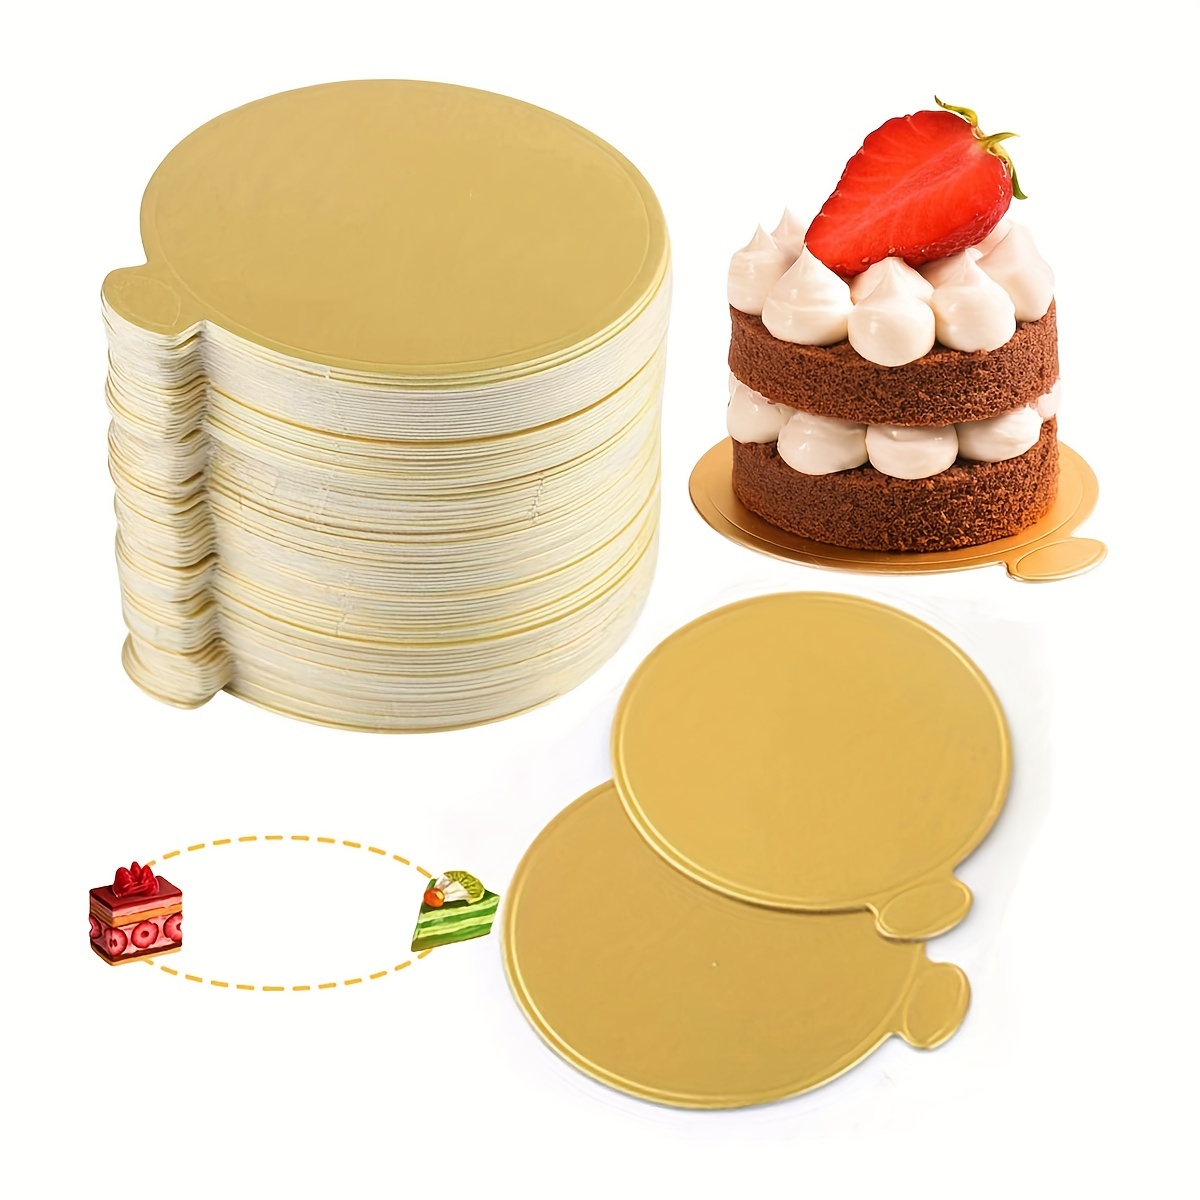 

50pcs, Mini Round Golden Cardboard Cake Base, Mousse Dessert Cake Boards, Disposable Paperboard Cupcake Boards, For Wedding Birthday Party Displays Tray - 3.5in/9cm